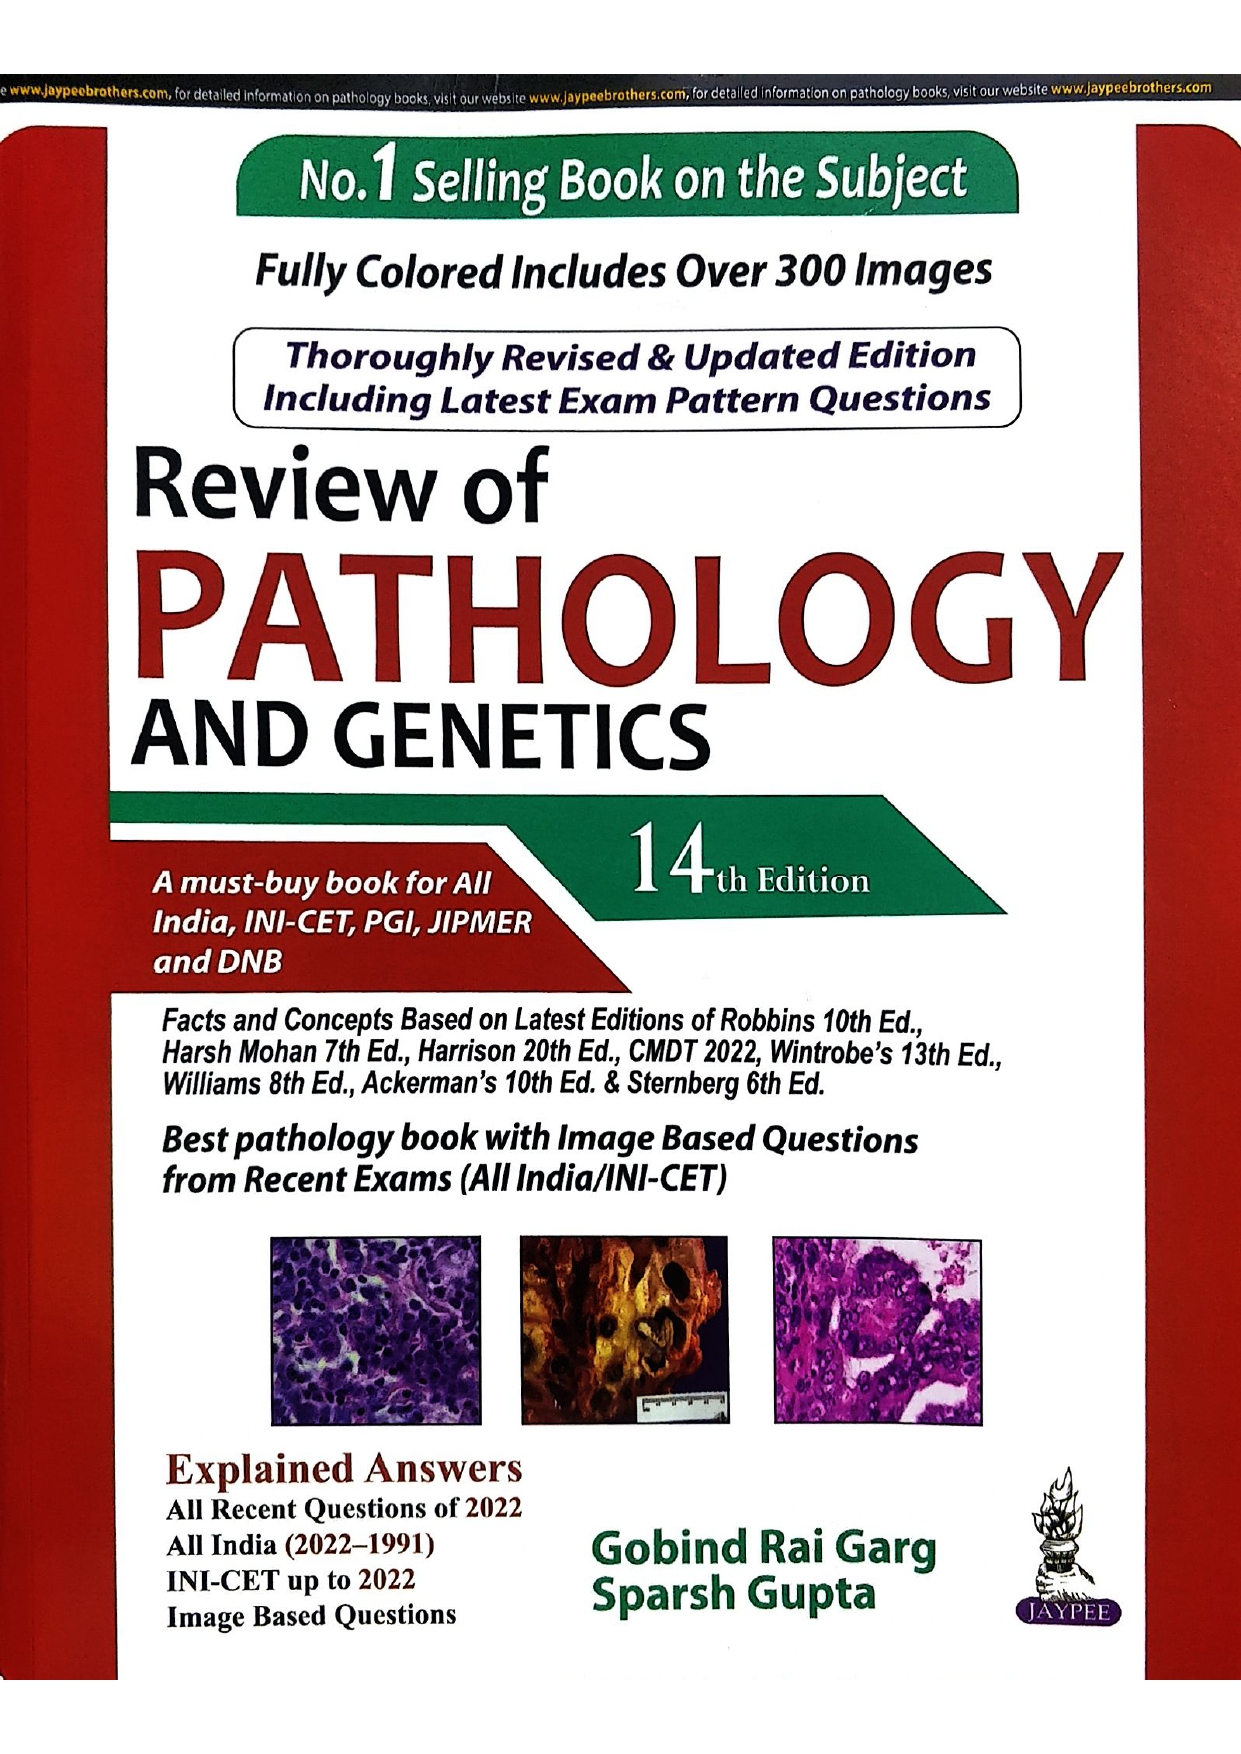 Review of Pathology and Genetics